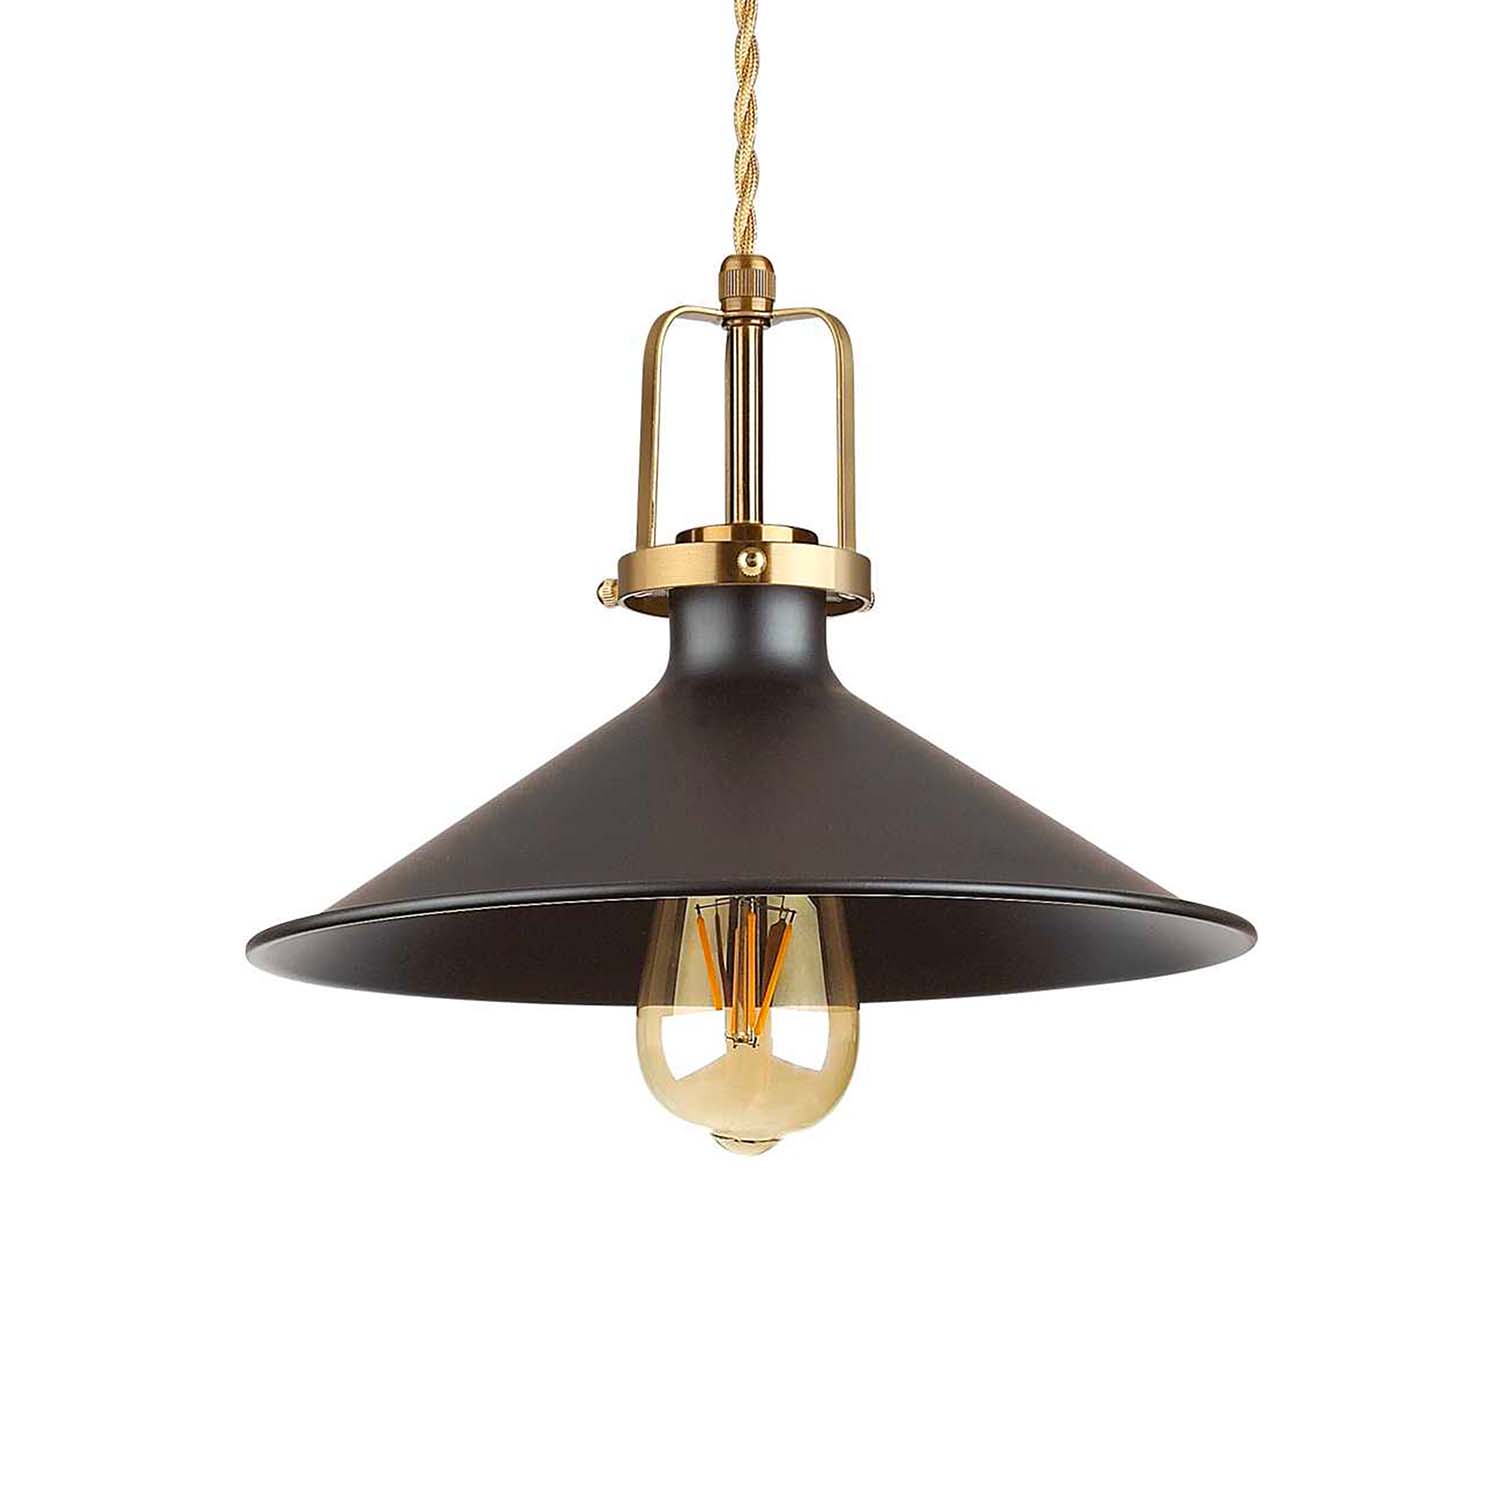 ERIS - Industrial pendant light in black or white steel and brass